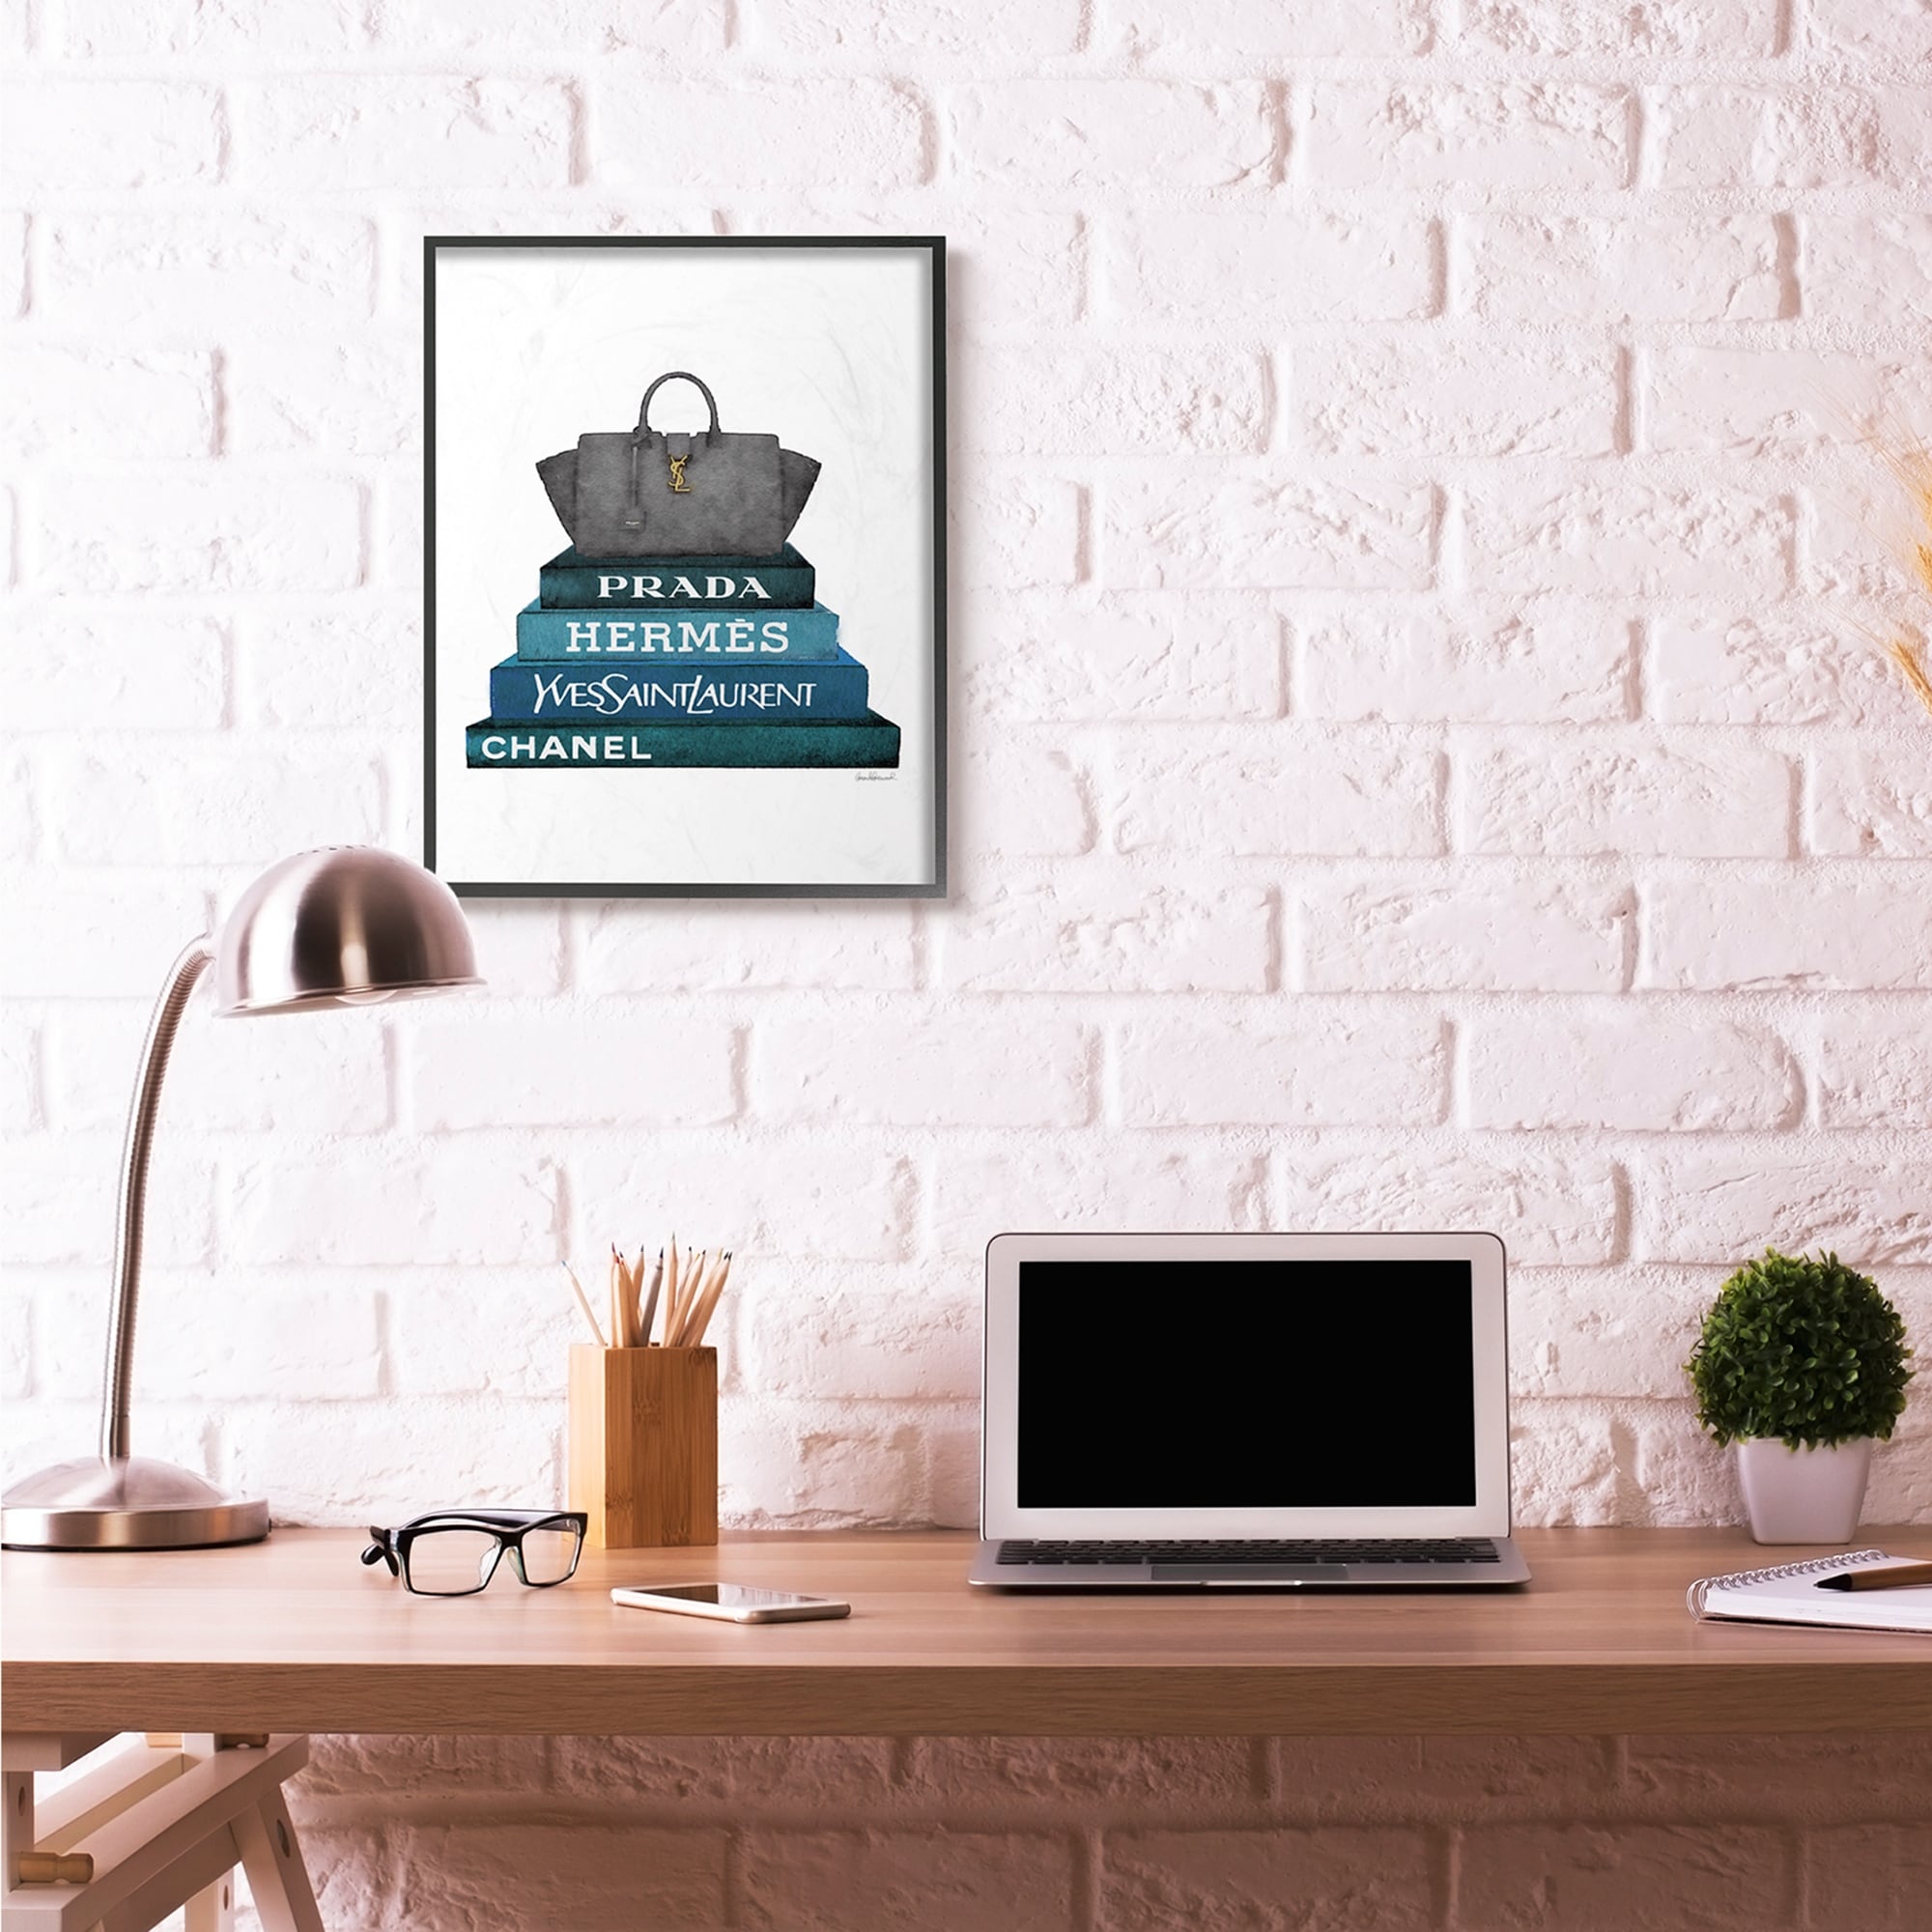 Designer Bag with Bookstack Canvas Wall Art, 18x24